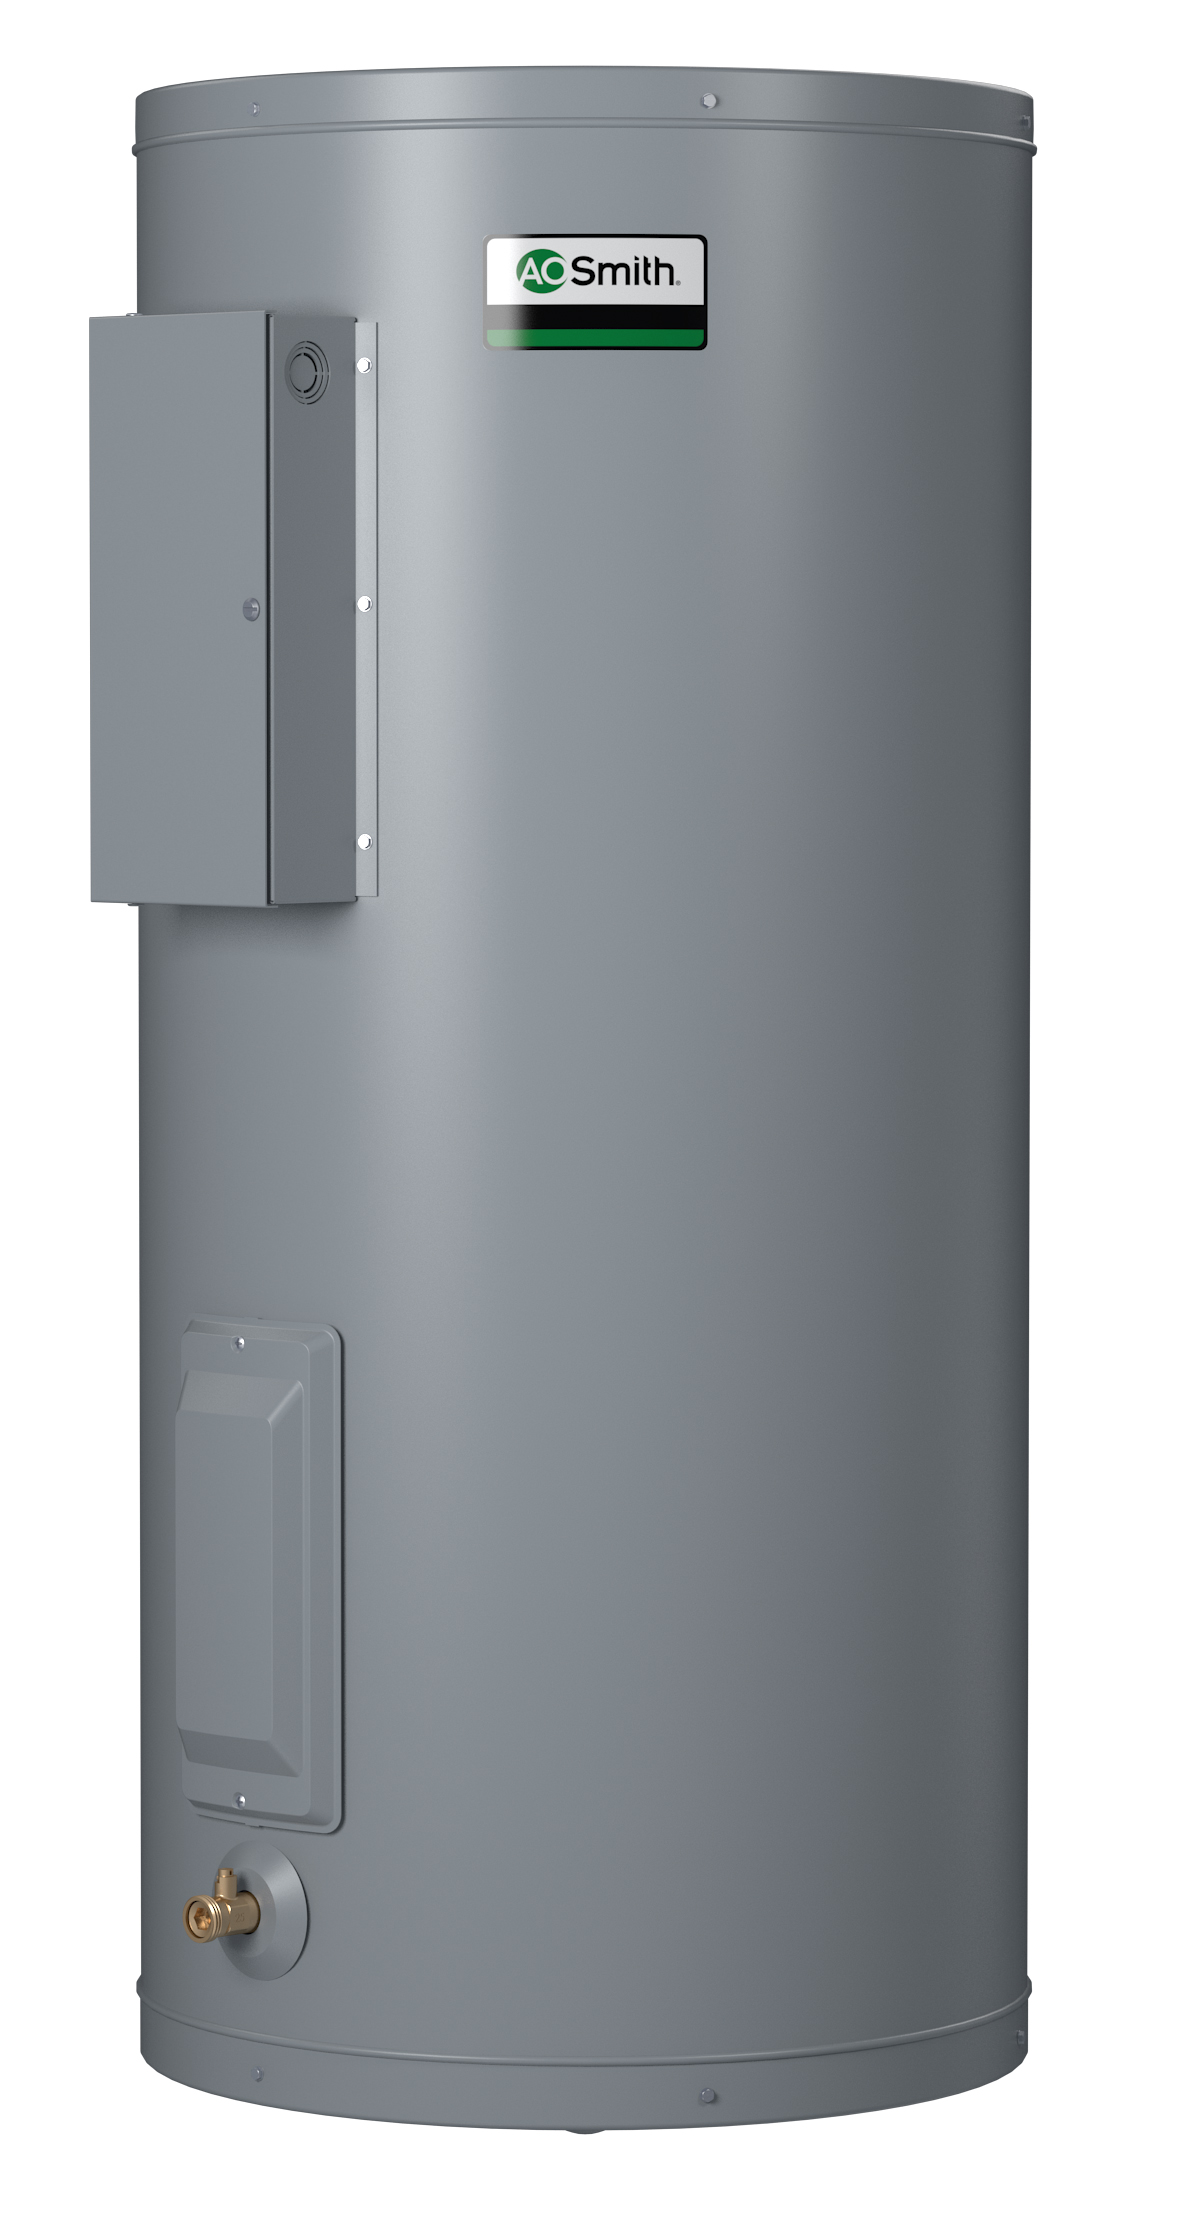 AO SMITH DEN-120D: 120 GALLONS, 12.2KW, 480 VOLT, 3 PHASE, (2-6100 WATT ELEMENTS, SIMULTANEOUS WIRING), DURA-POWER, LIGHT DUTY COMMERCIAL ELECTRIC WATER HEATER